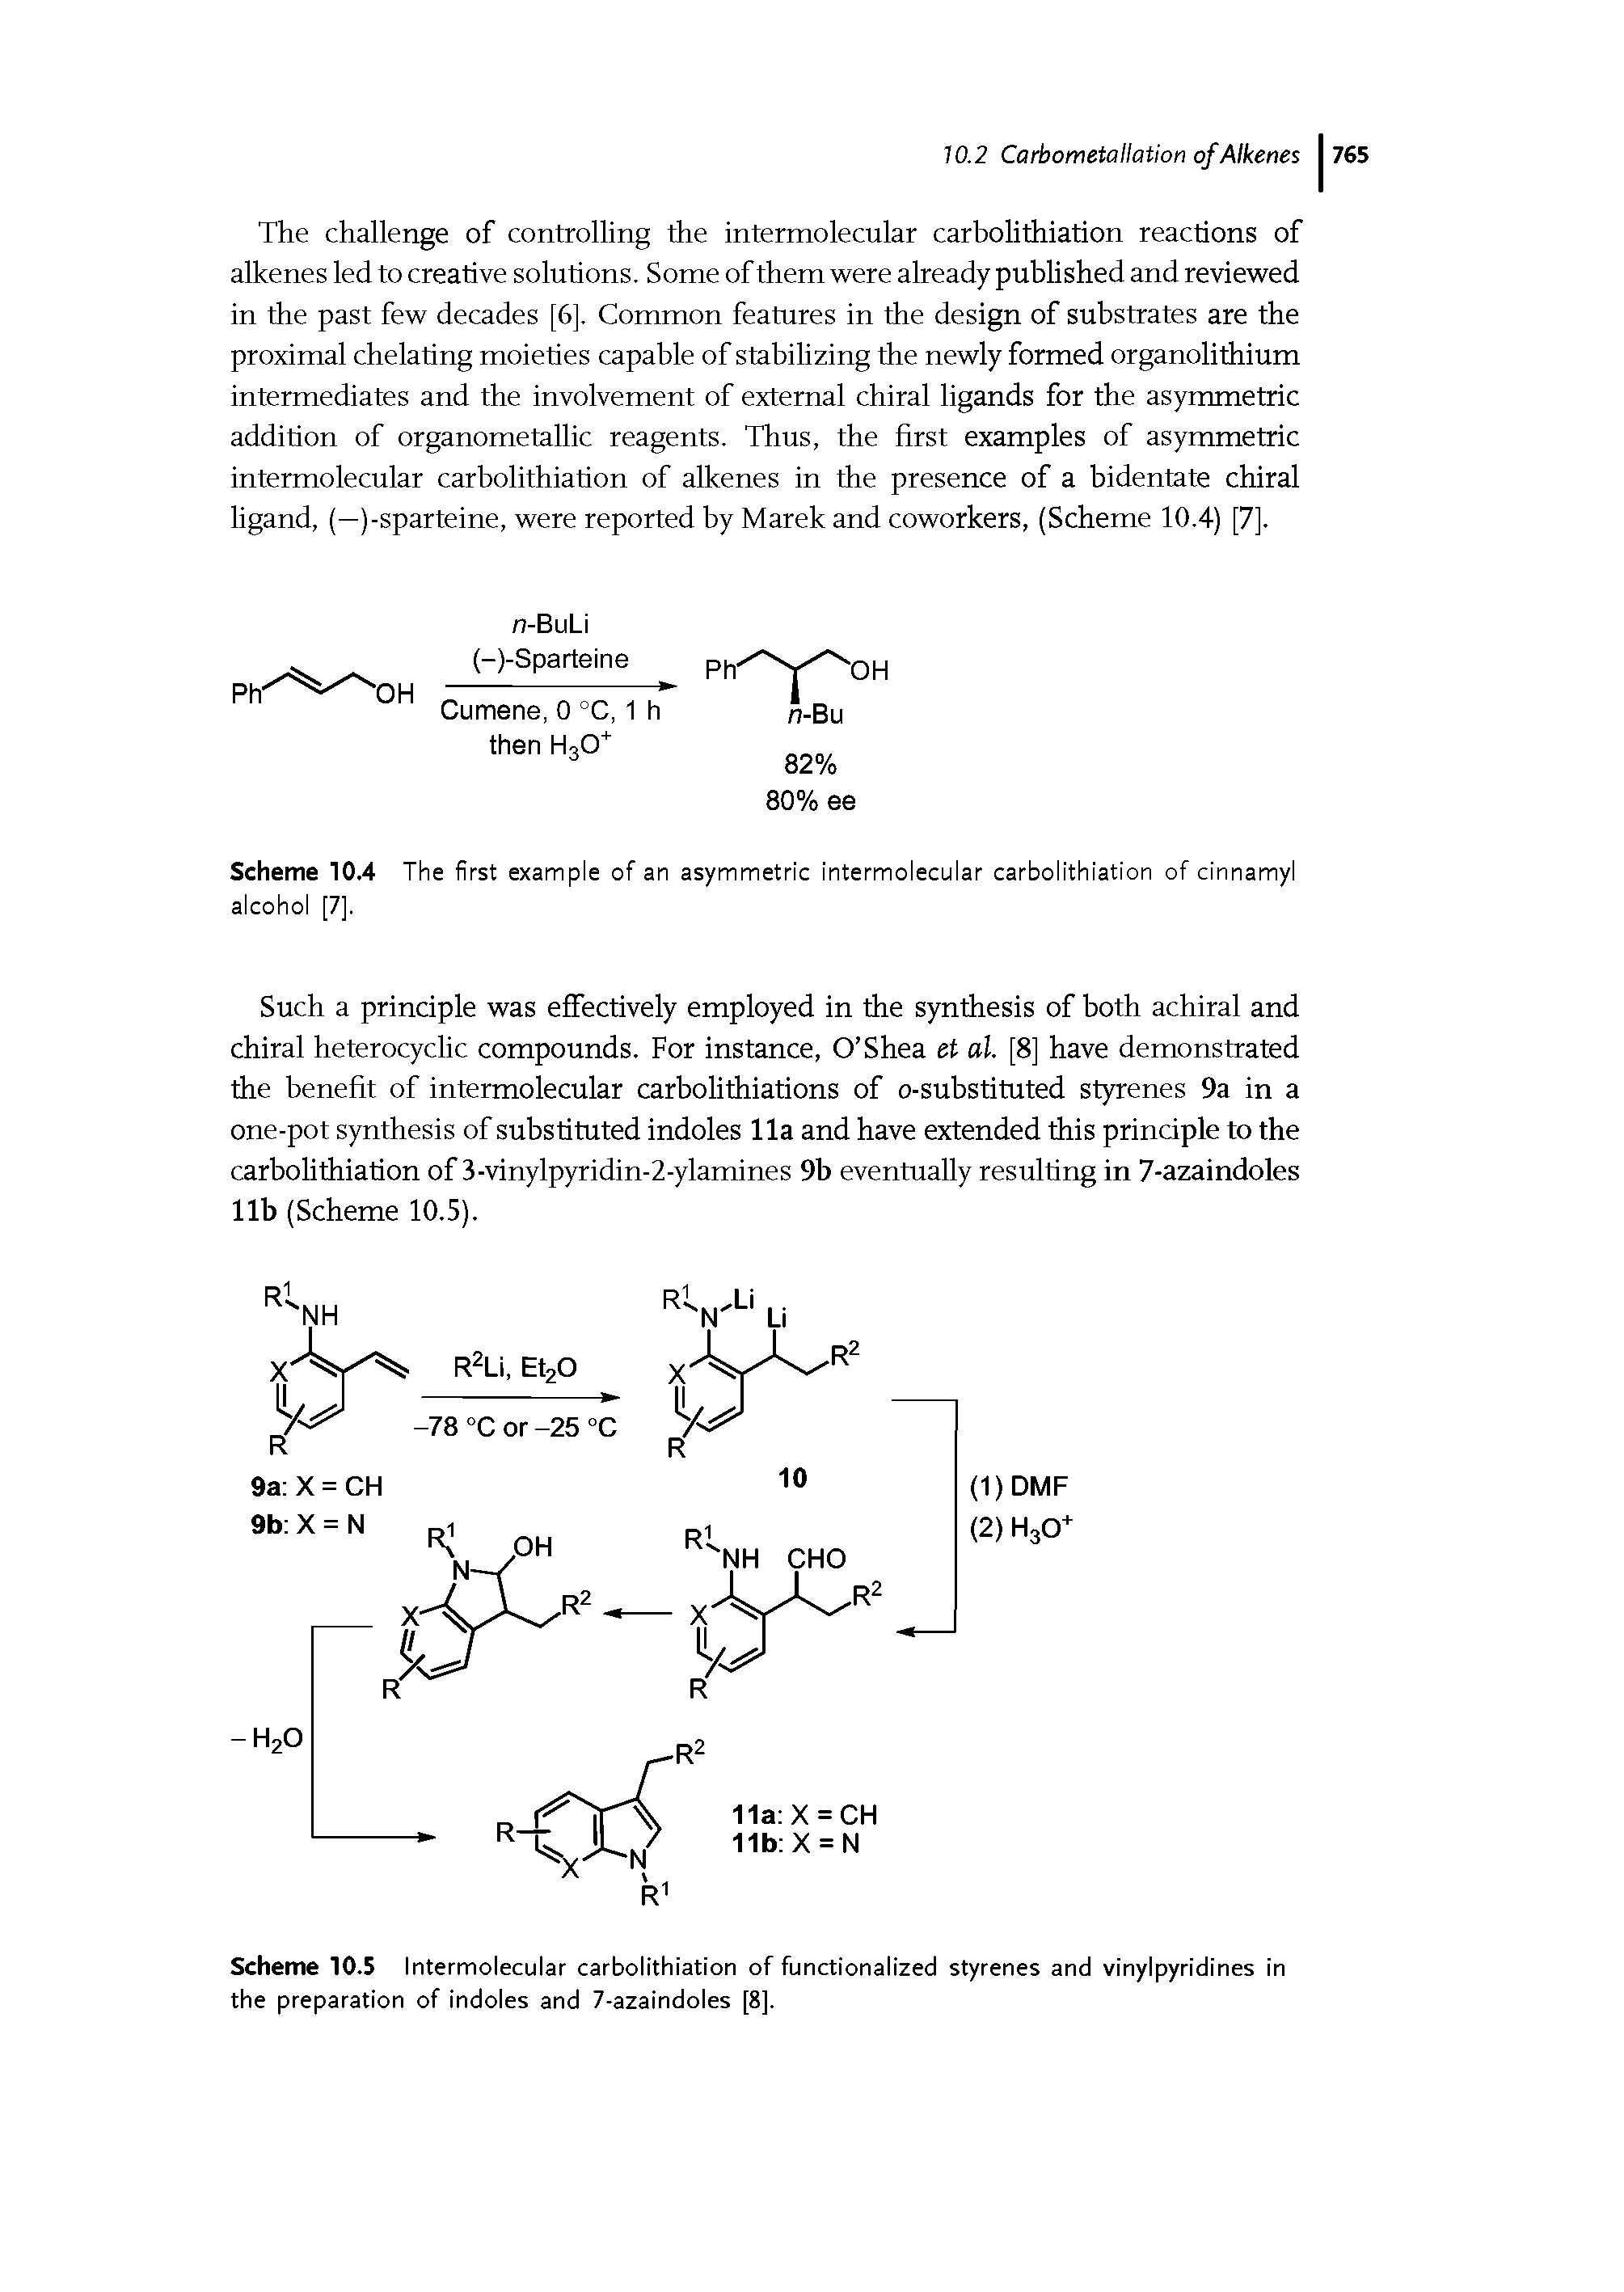 Scheme 10.5 Intermolecular carbolithiation of functionalized styrenes and vinylpyridines in the preparation of indoles and 7-azaindoles [8].